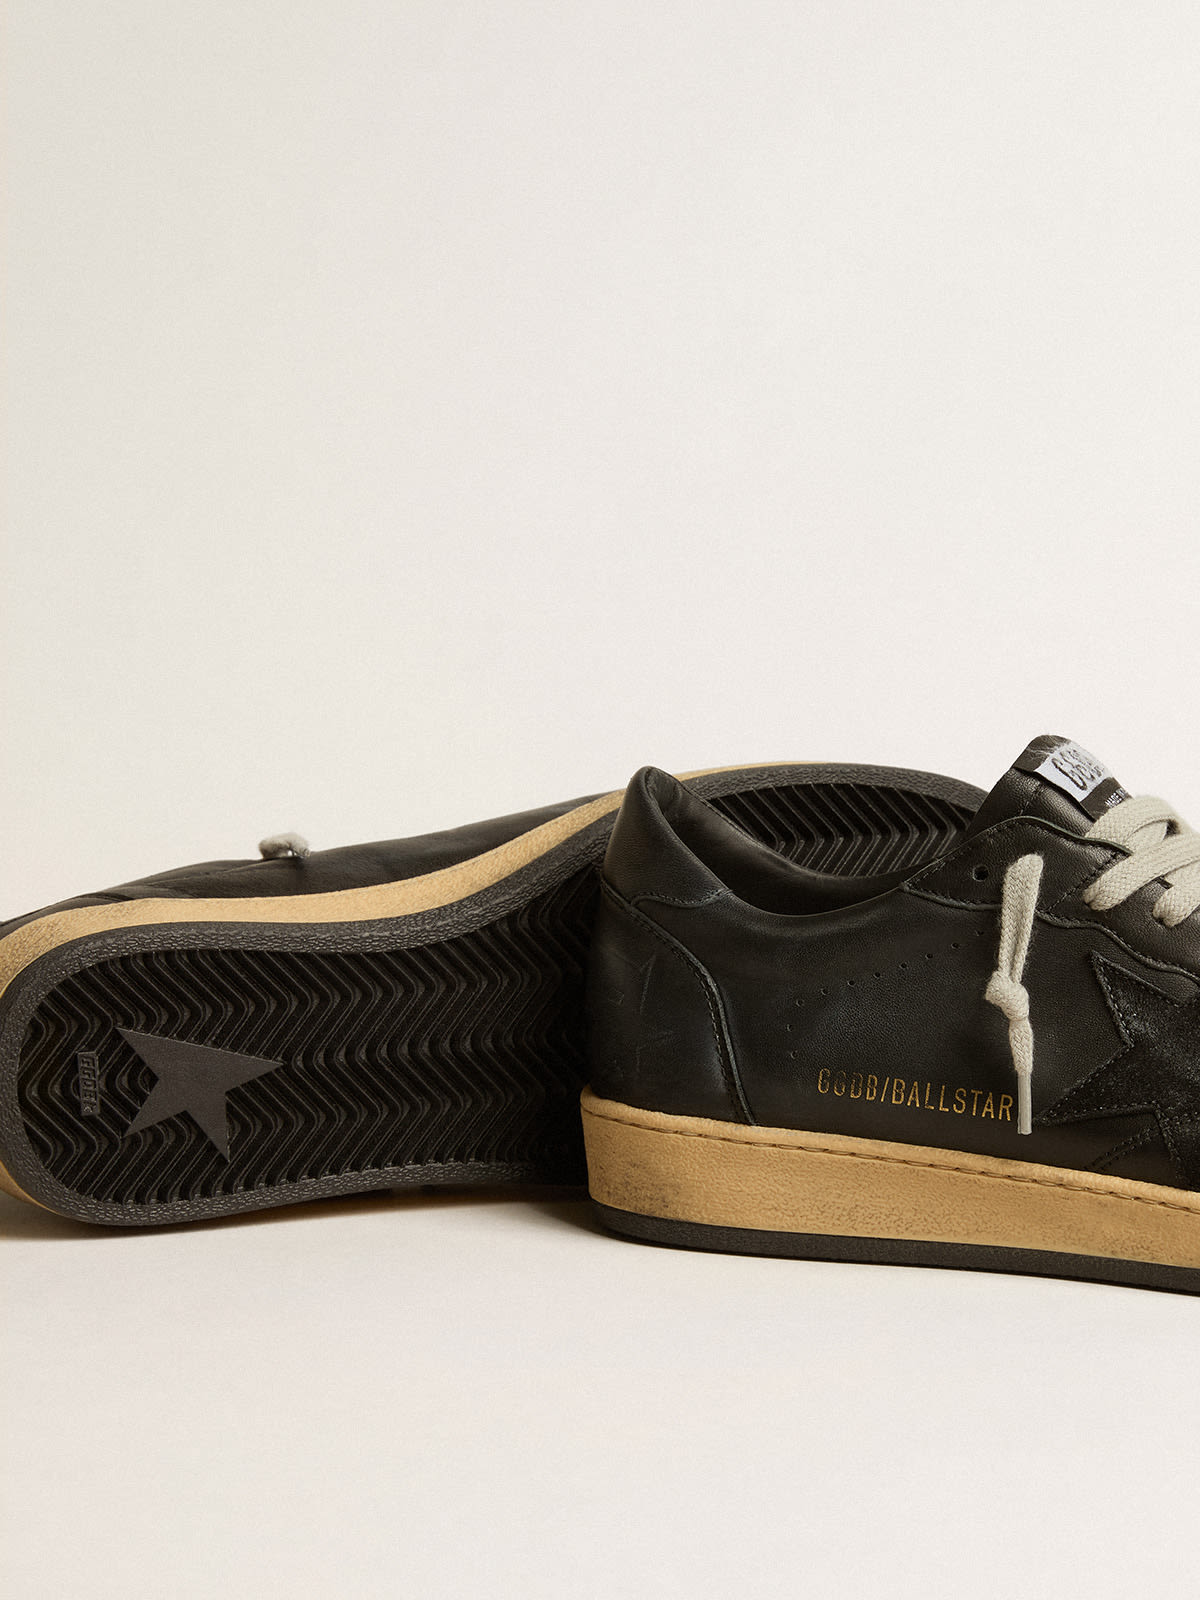 Golden Goose Ball Star Shoes in Black